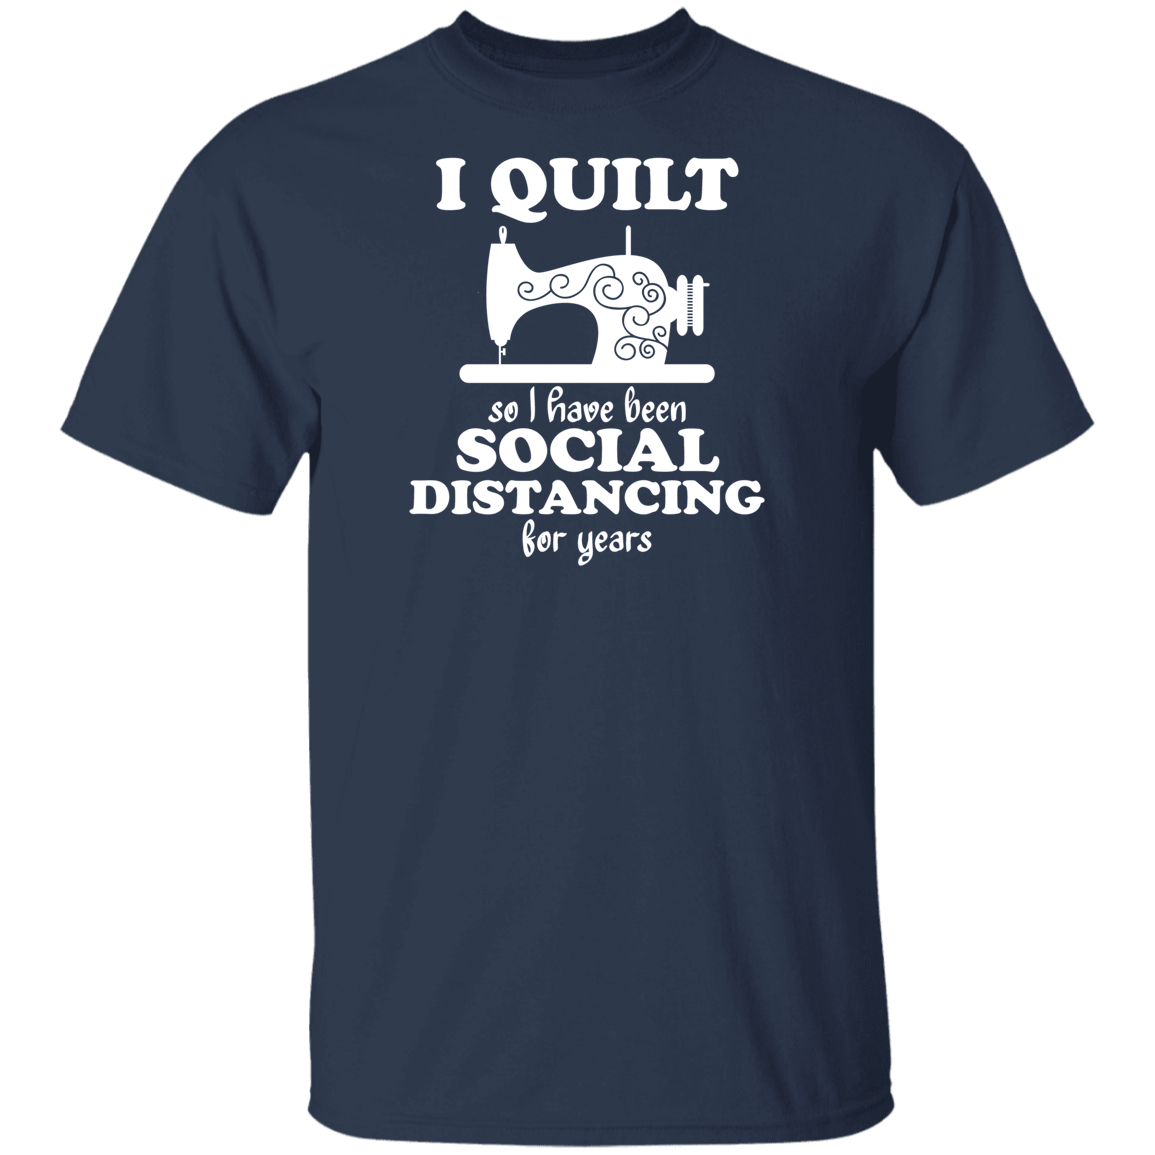 I Quilt so I have been Social Distancing T-Shirt